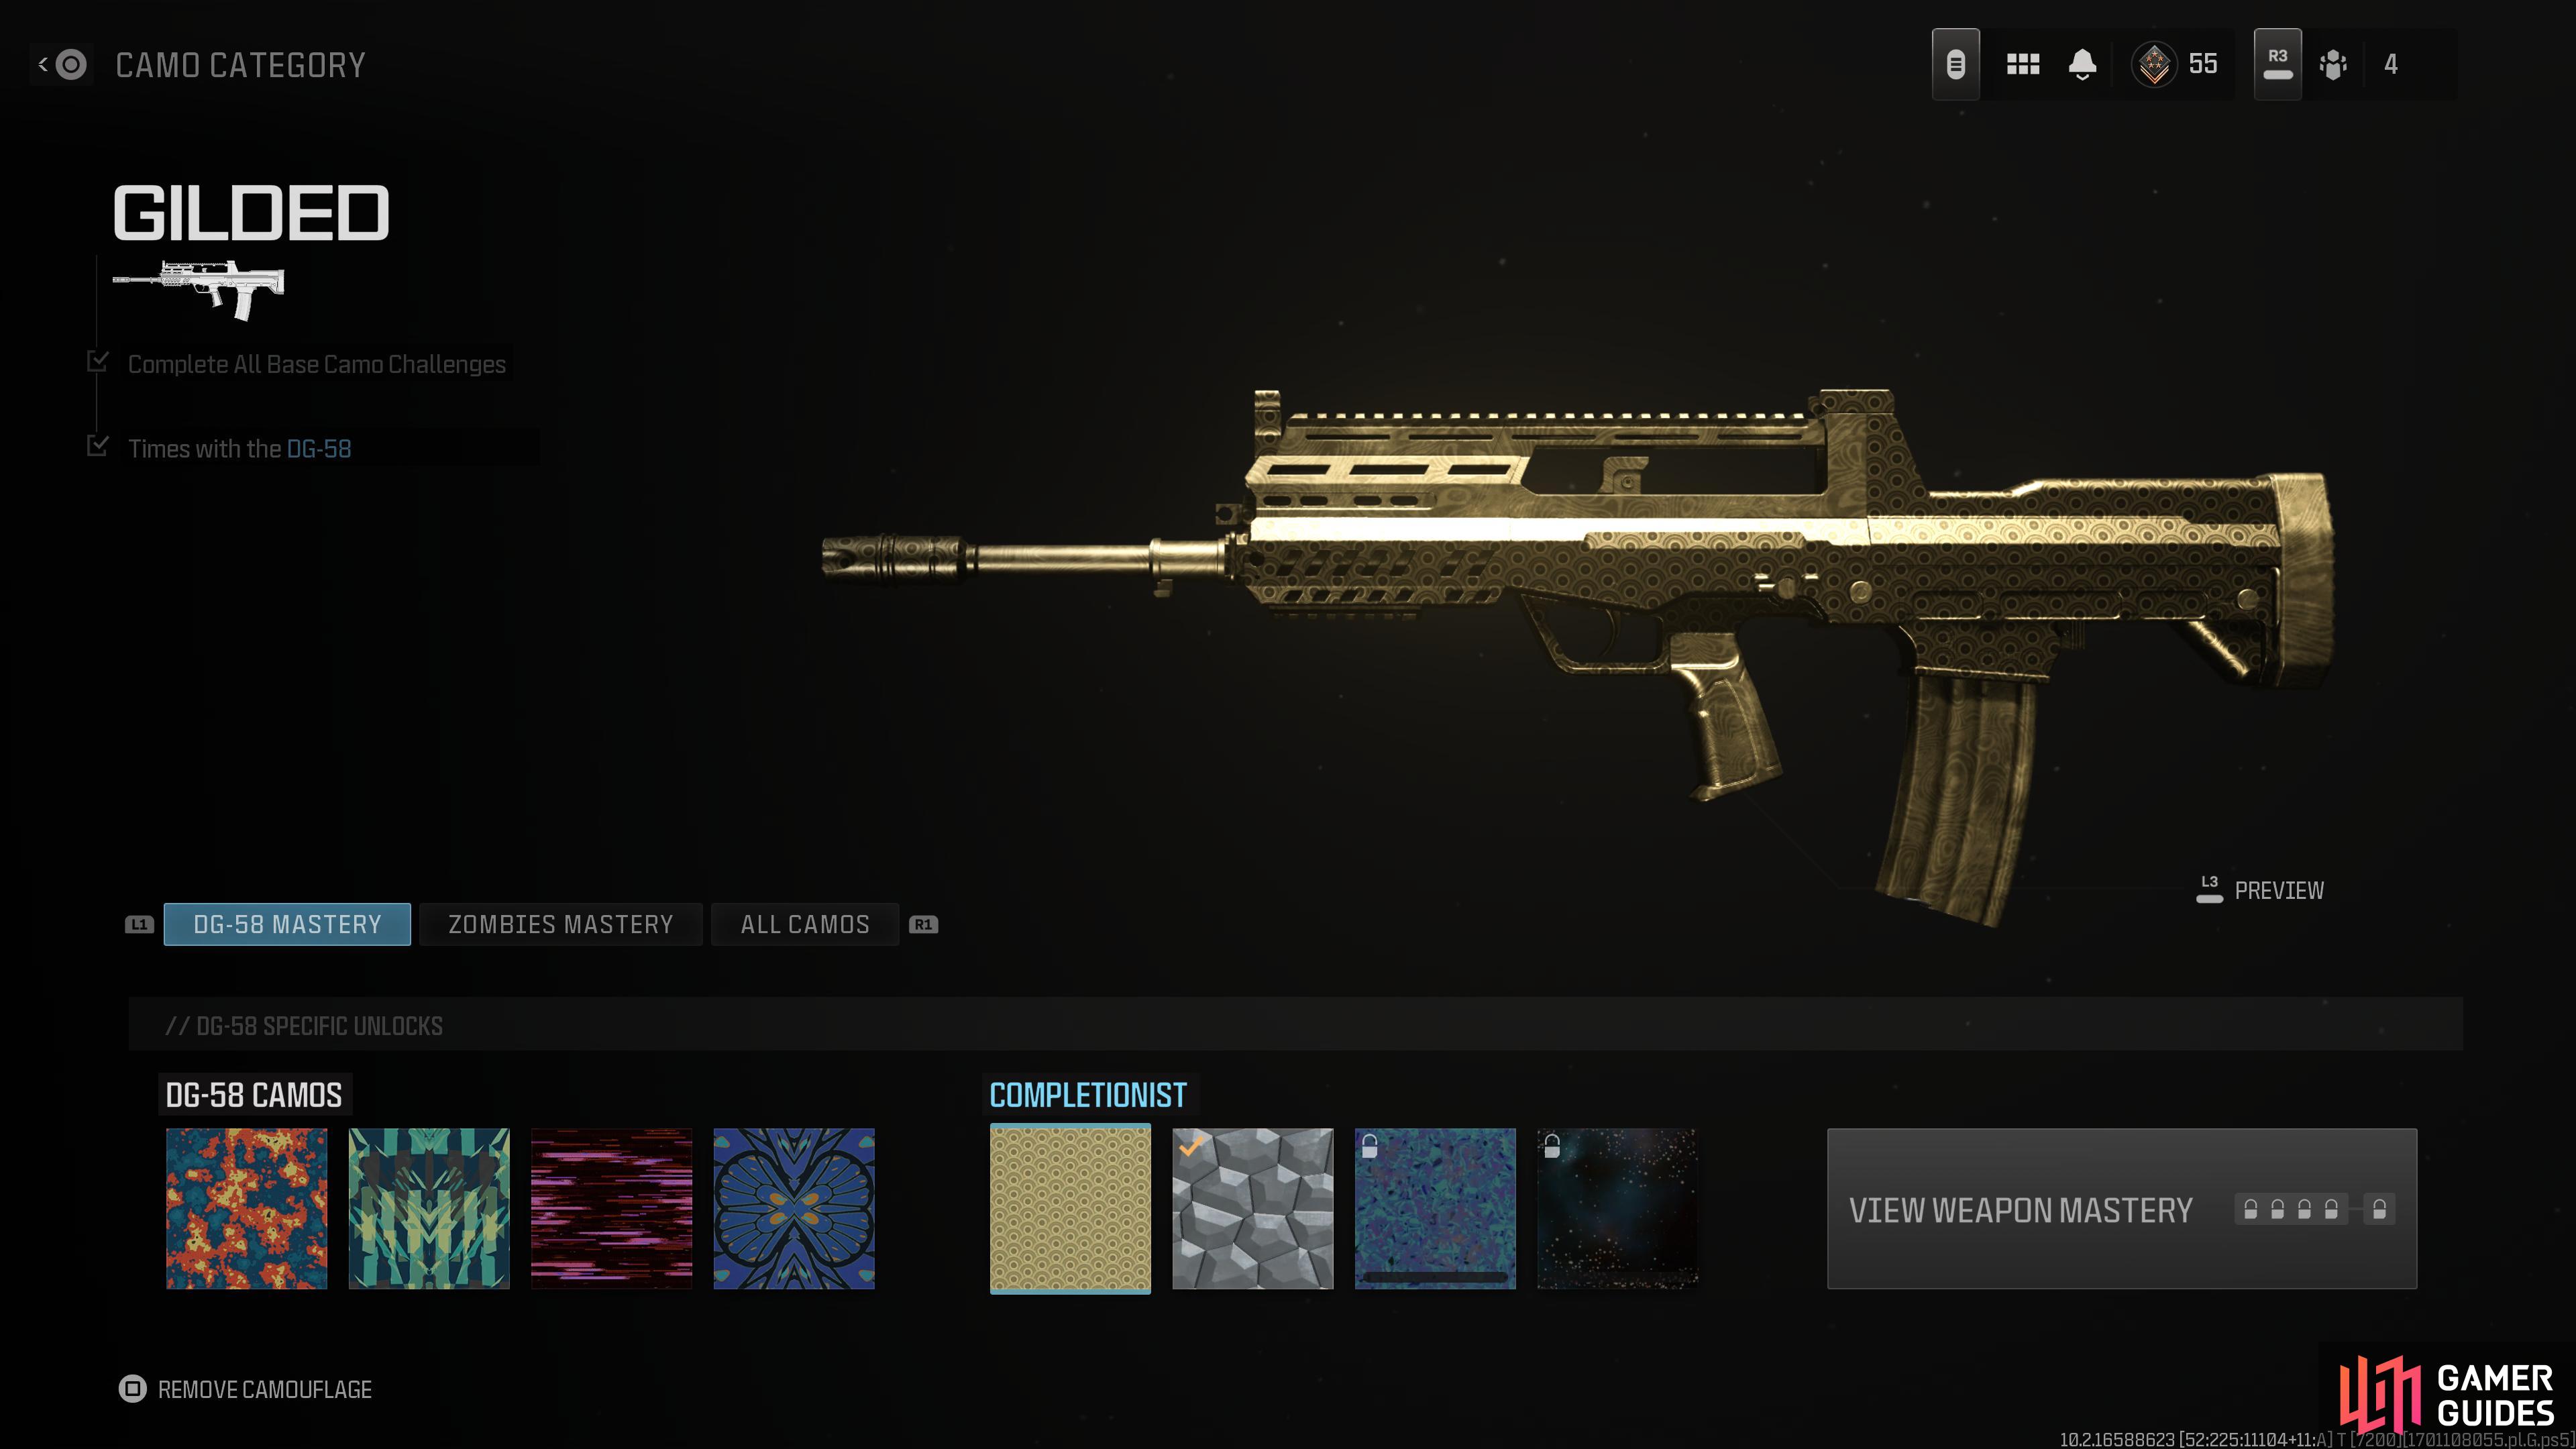 The Gilded Camo looks great on the DG-58 in MW3.